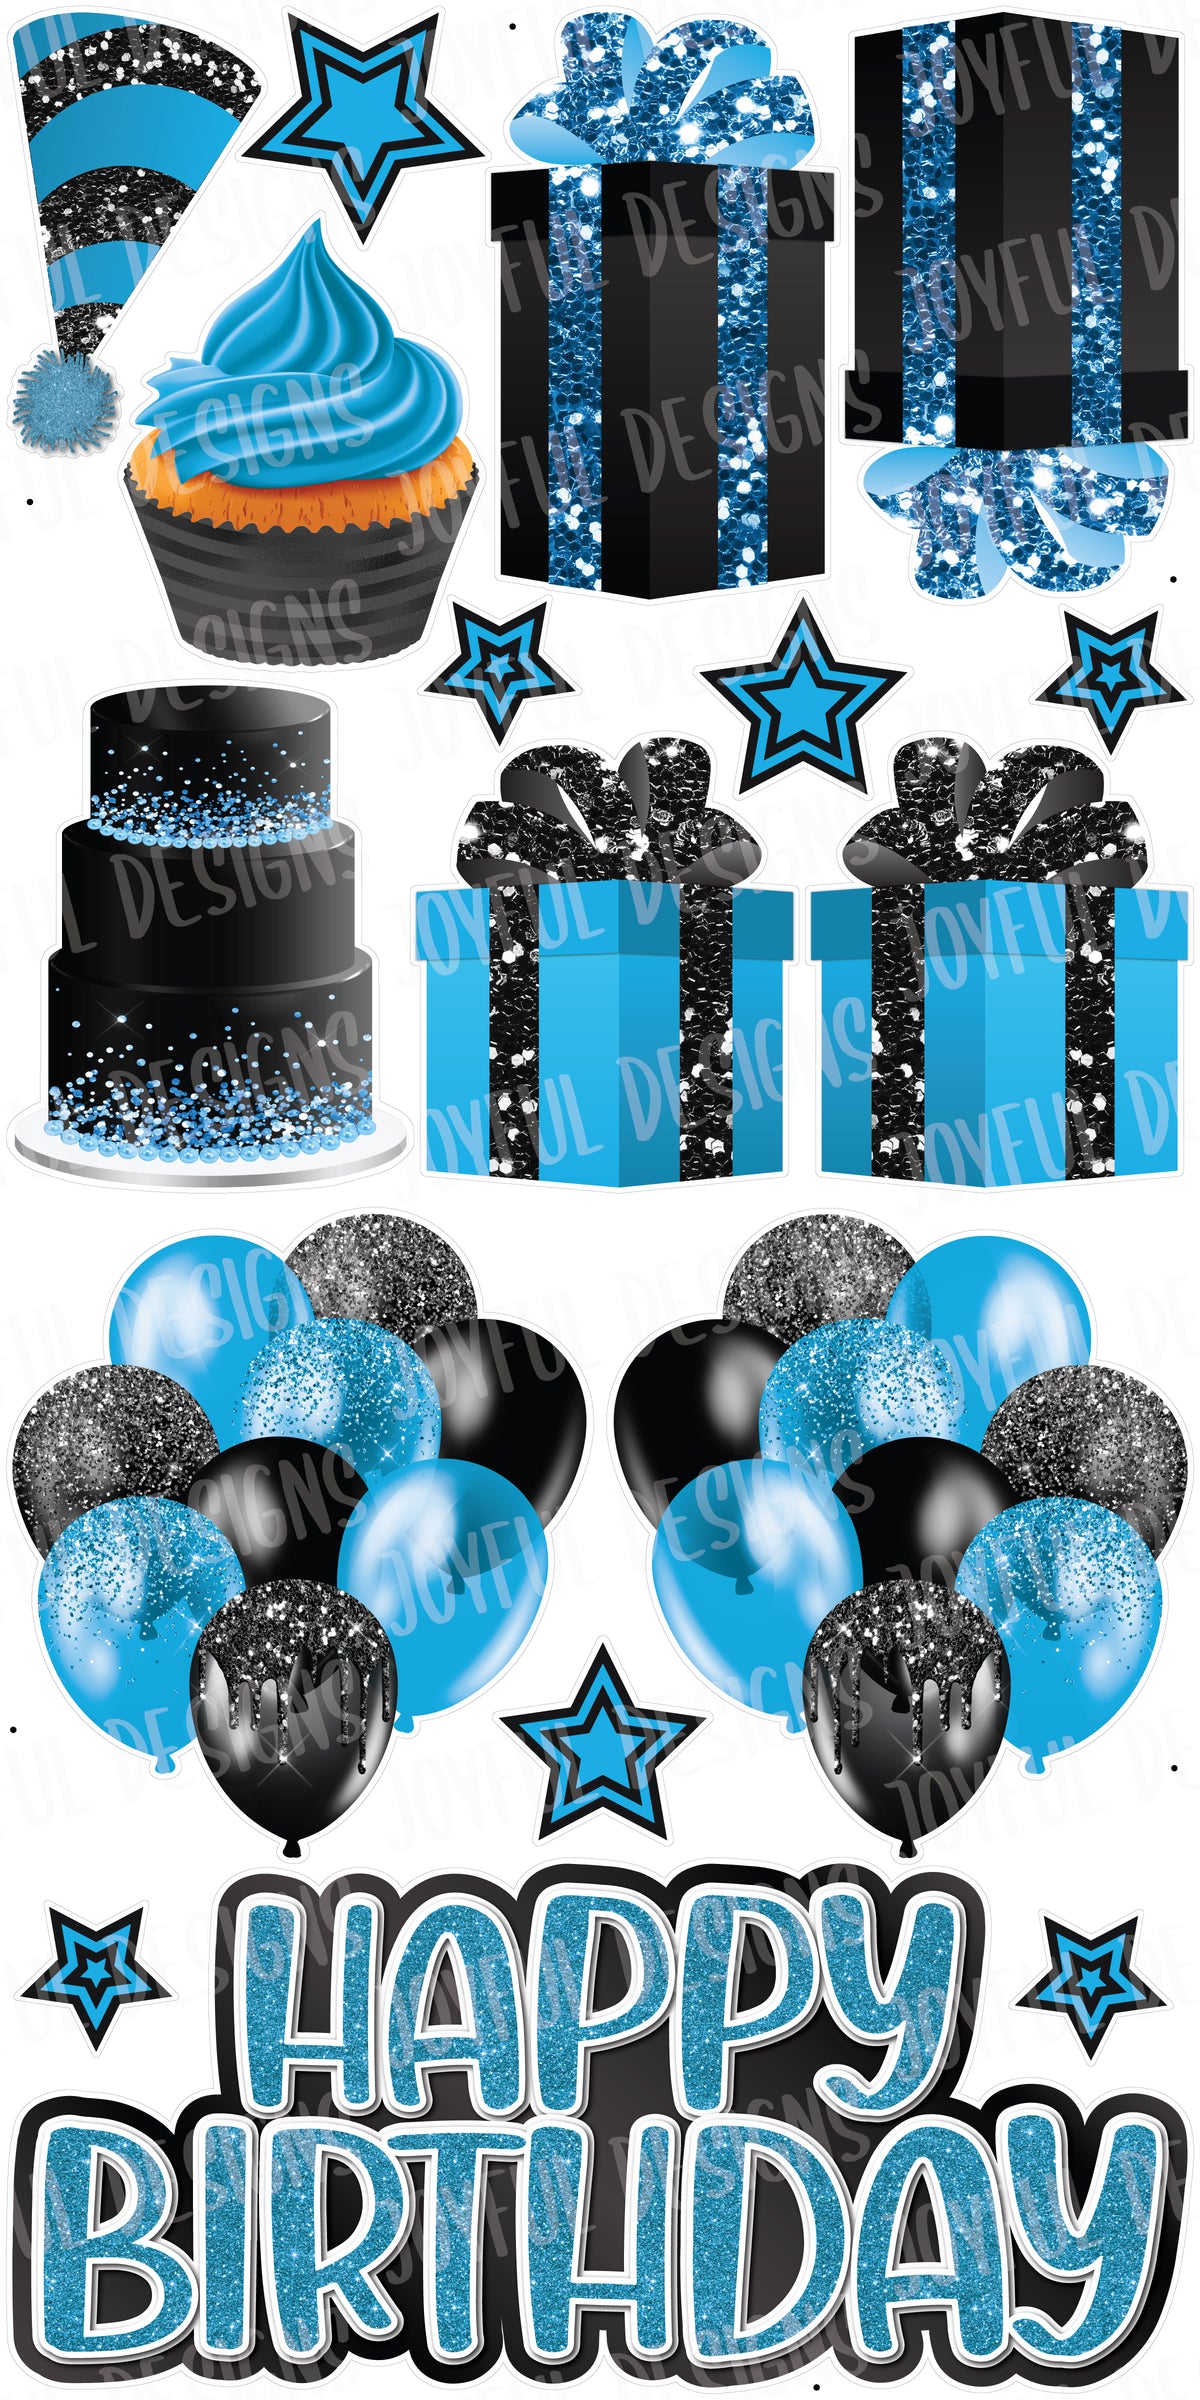 Turquoise & Black "One and Done" Birthday Set